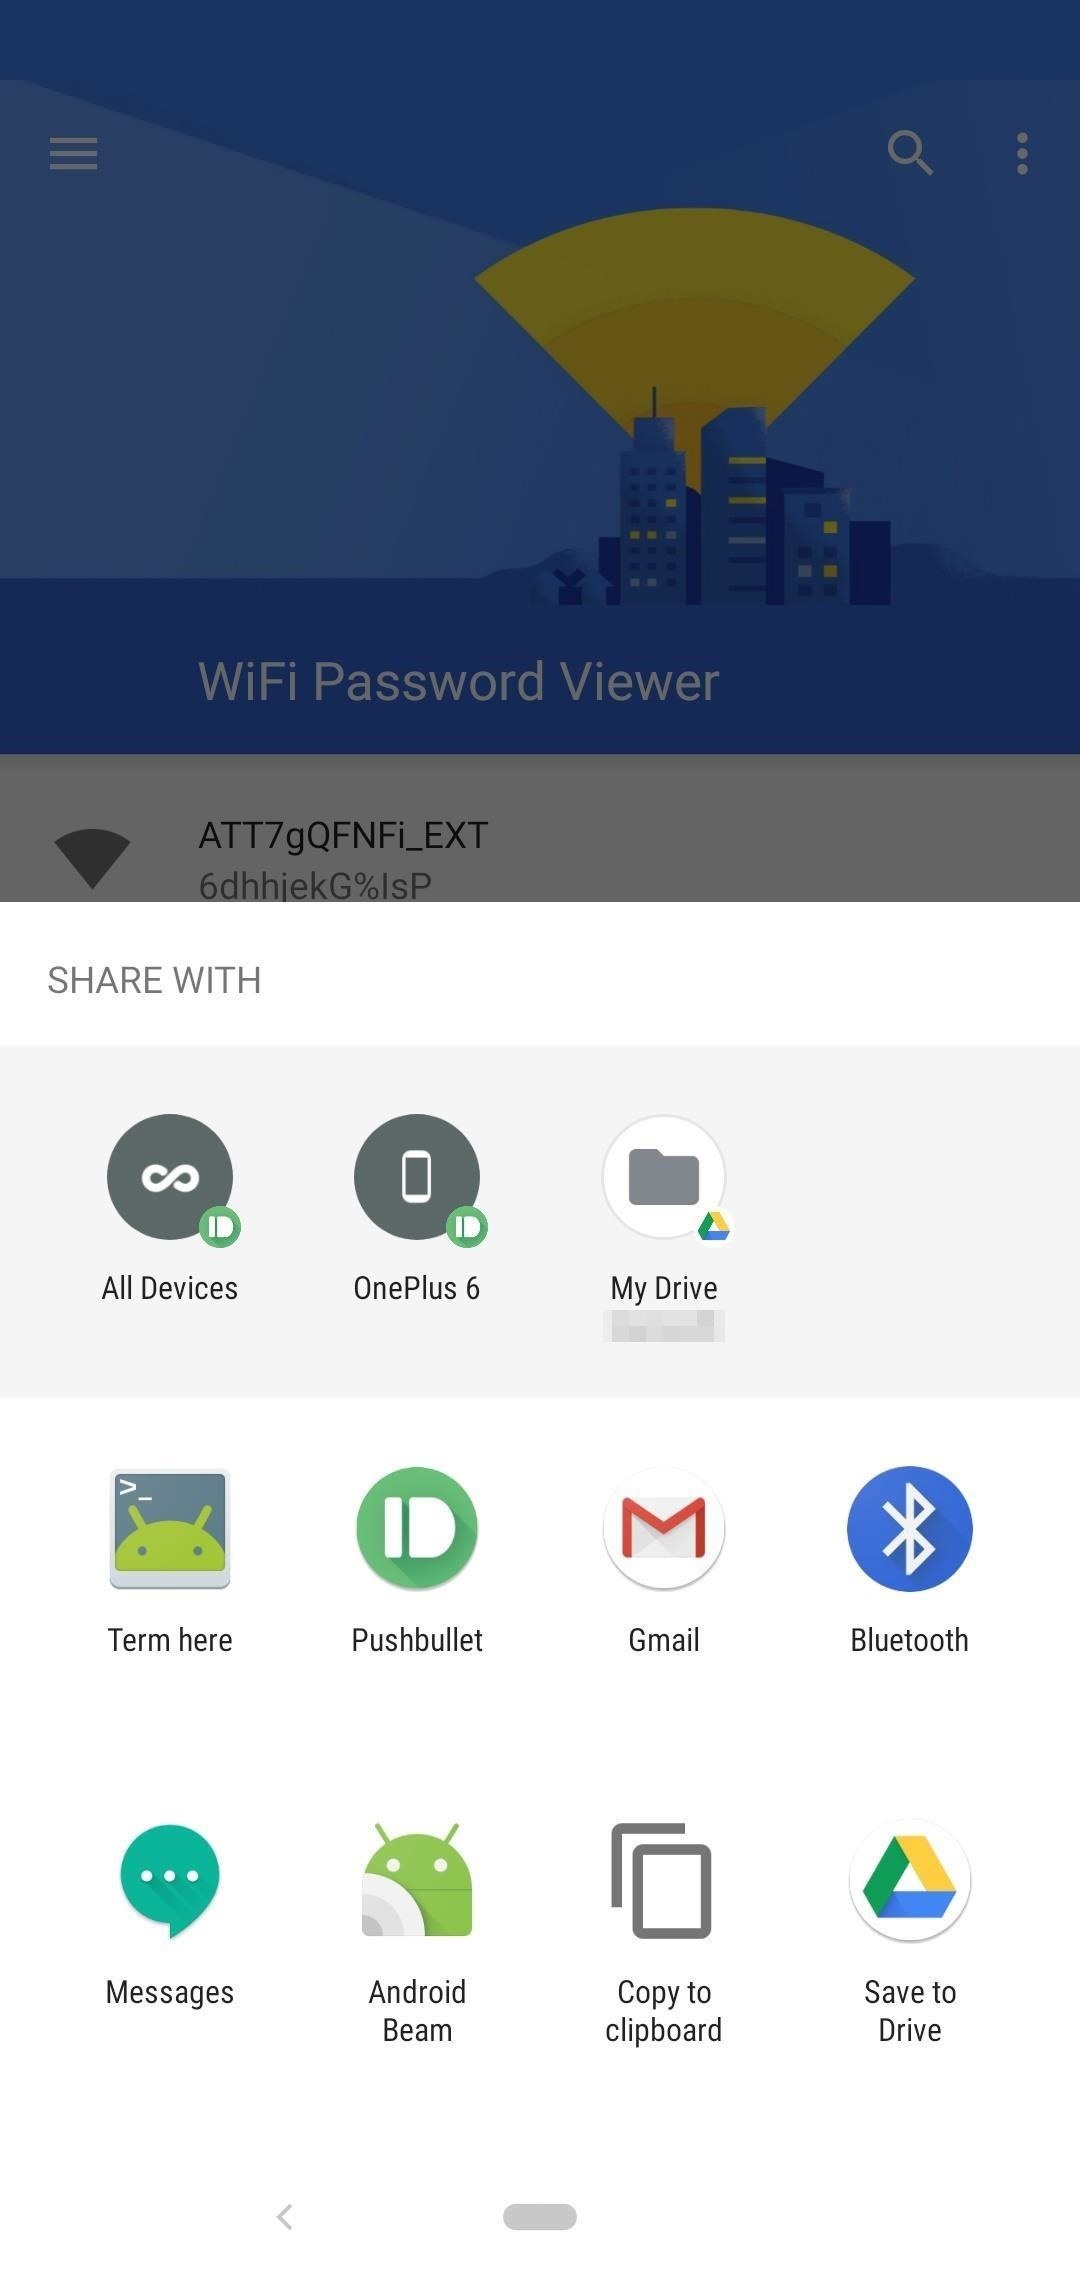 How to See Passwords for Wi-Fi Networks You've Connected Your Android Device To